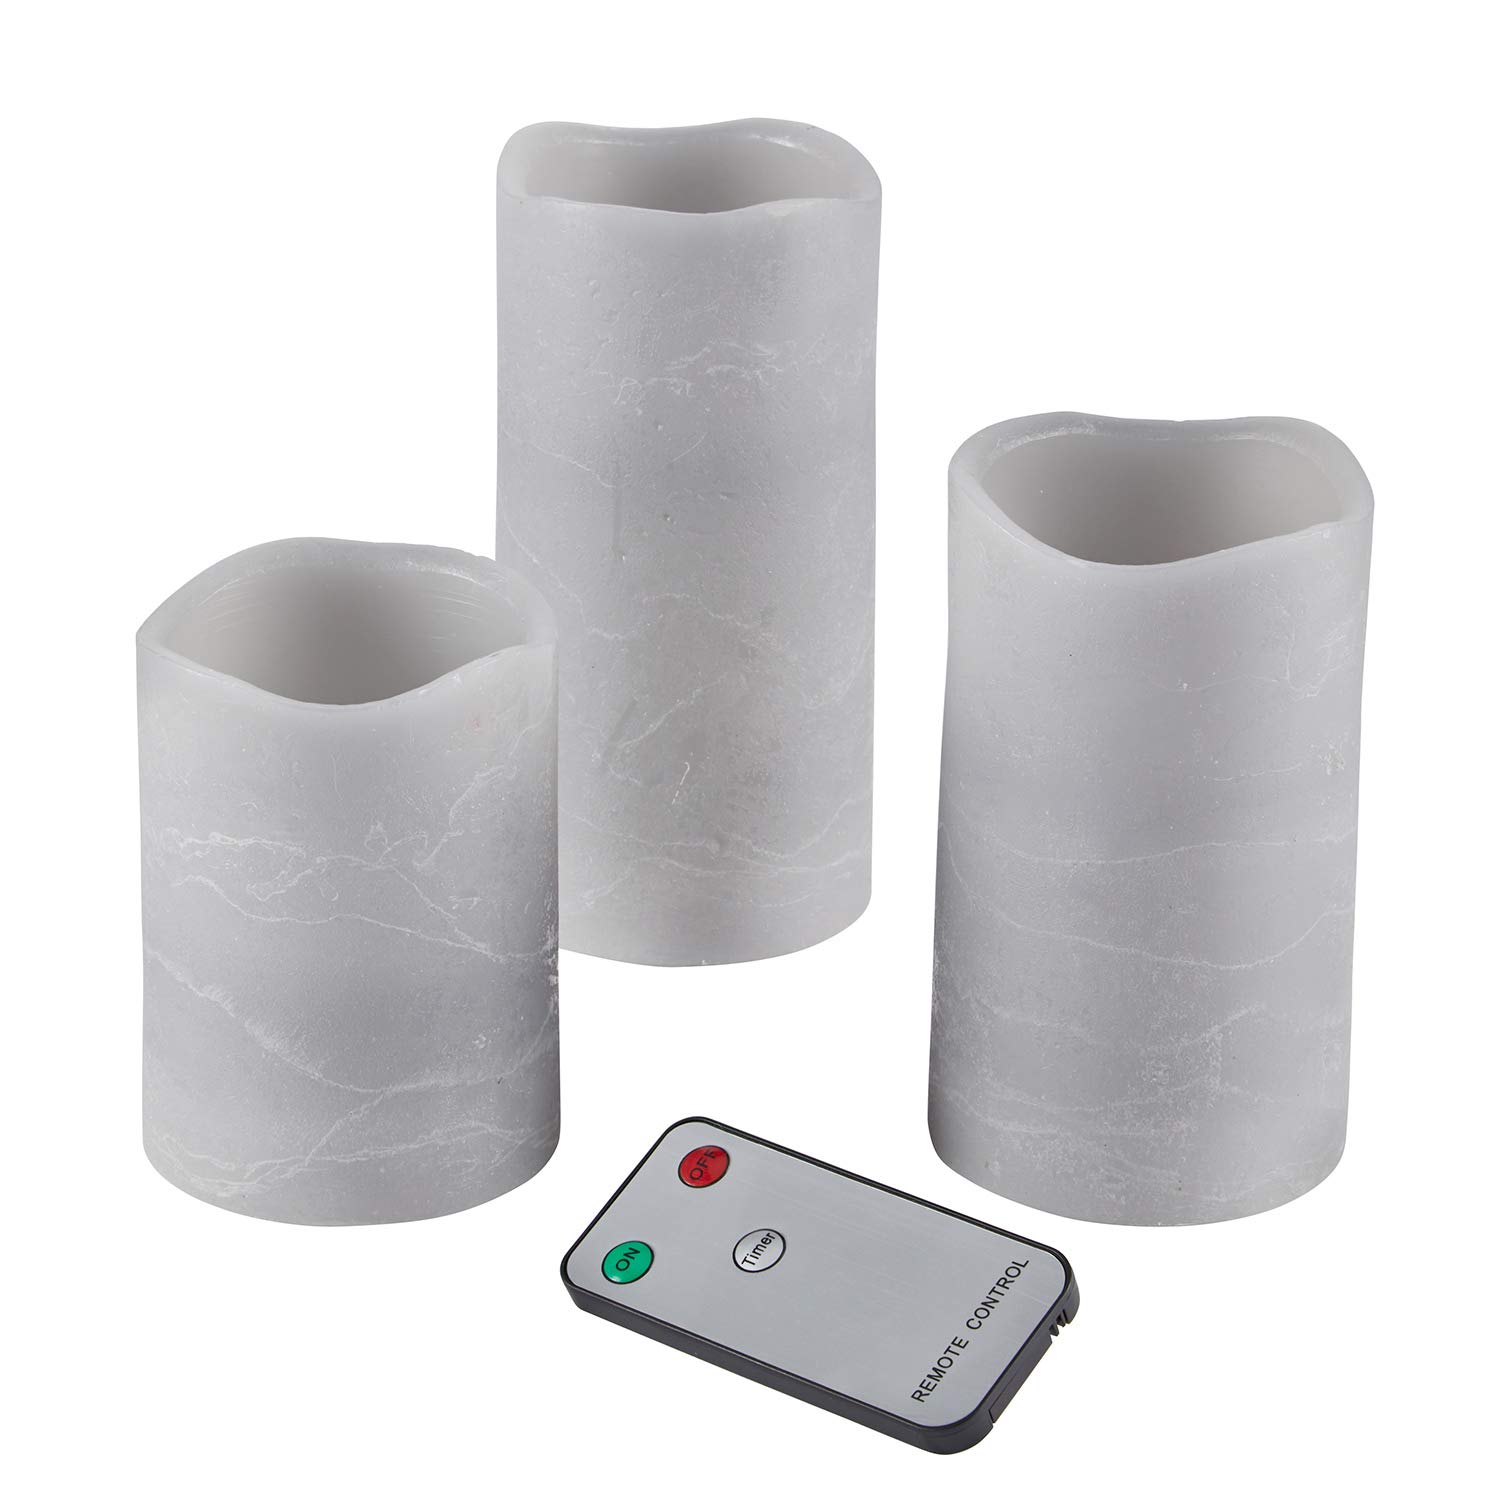 Lights4fun, Inc. Set of 3 Gray Wax Battery Operated Flameless LED Pillar Candles with Remote Control